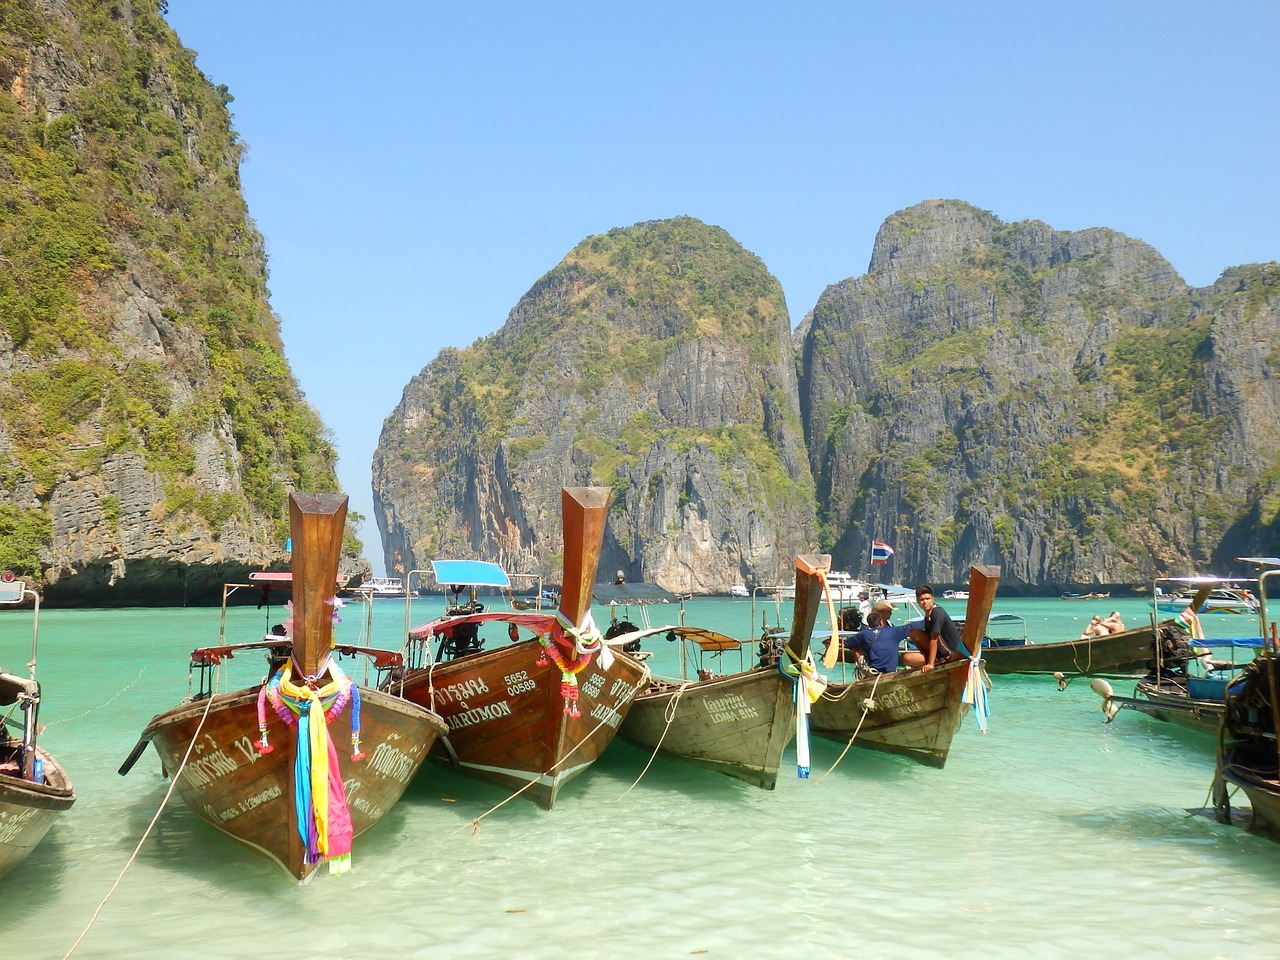 3-Day Adventure and Relaxation in Koh Phi Phi